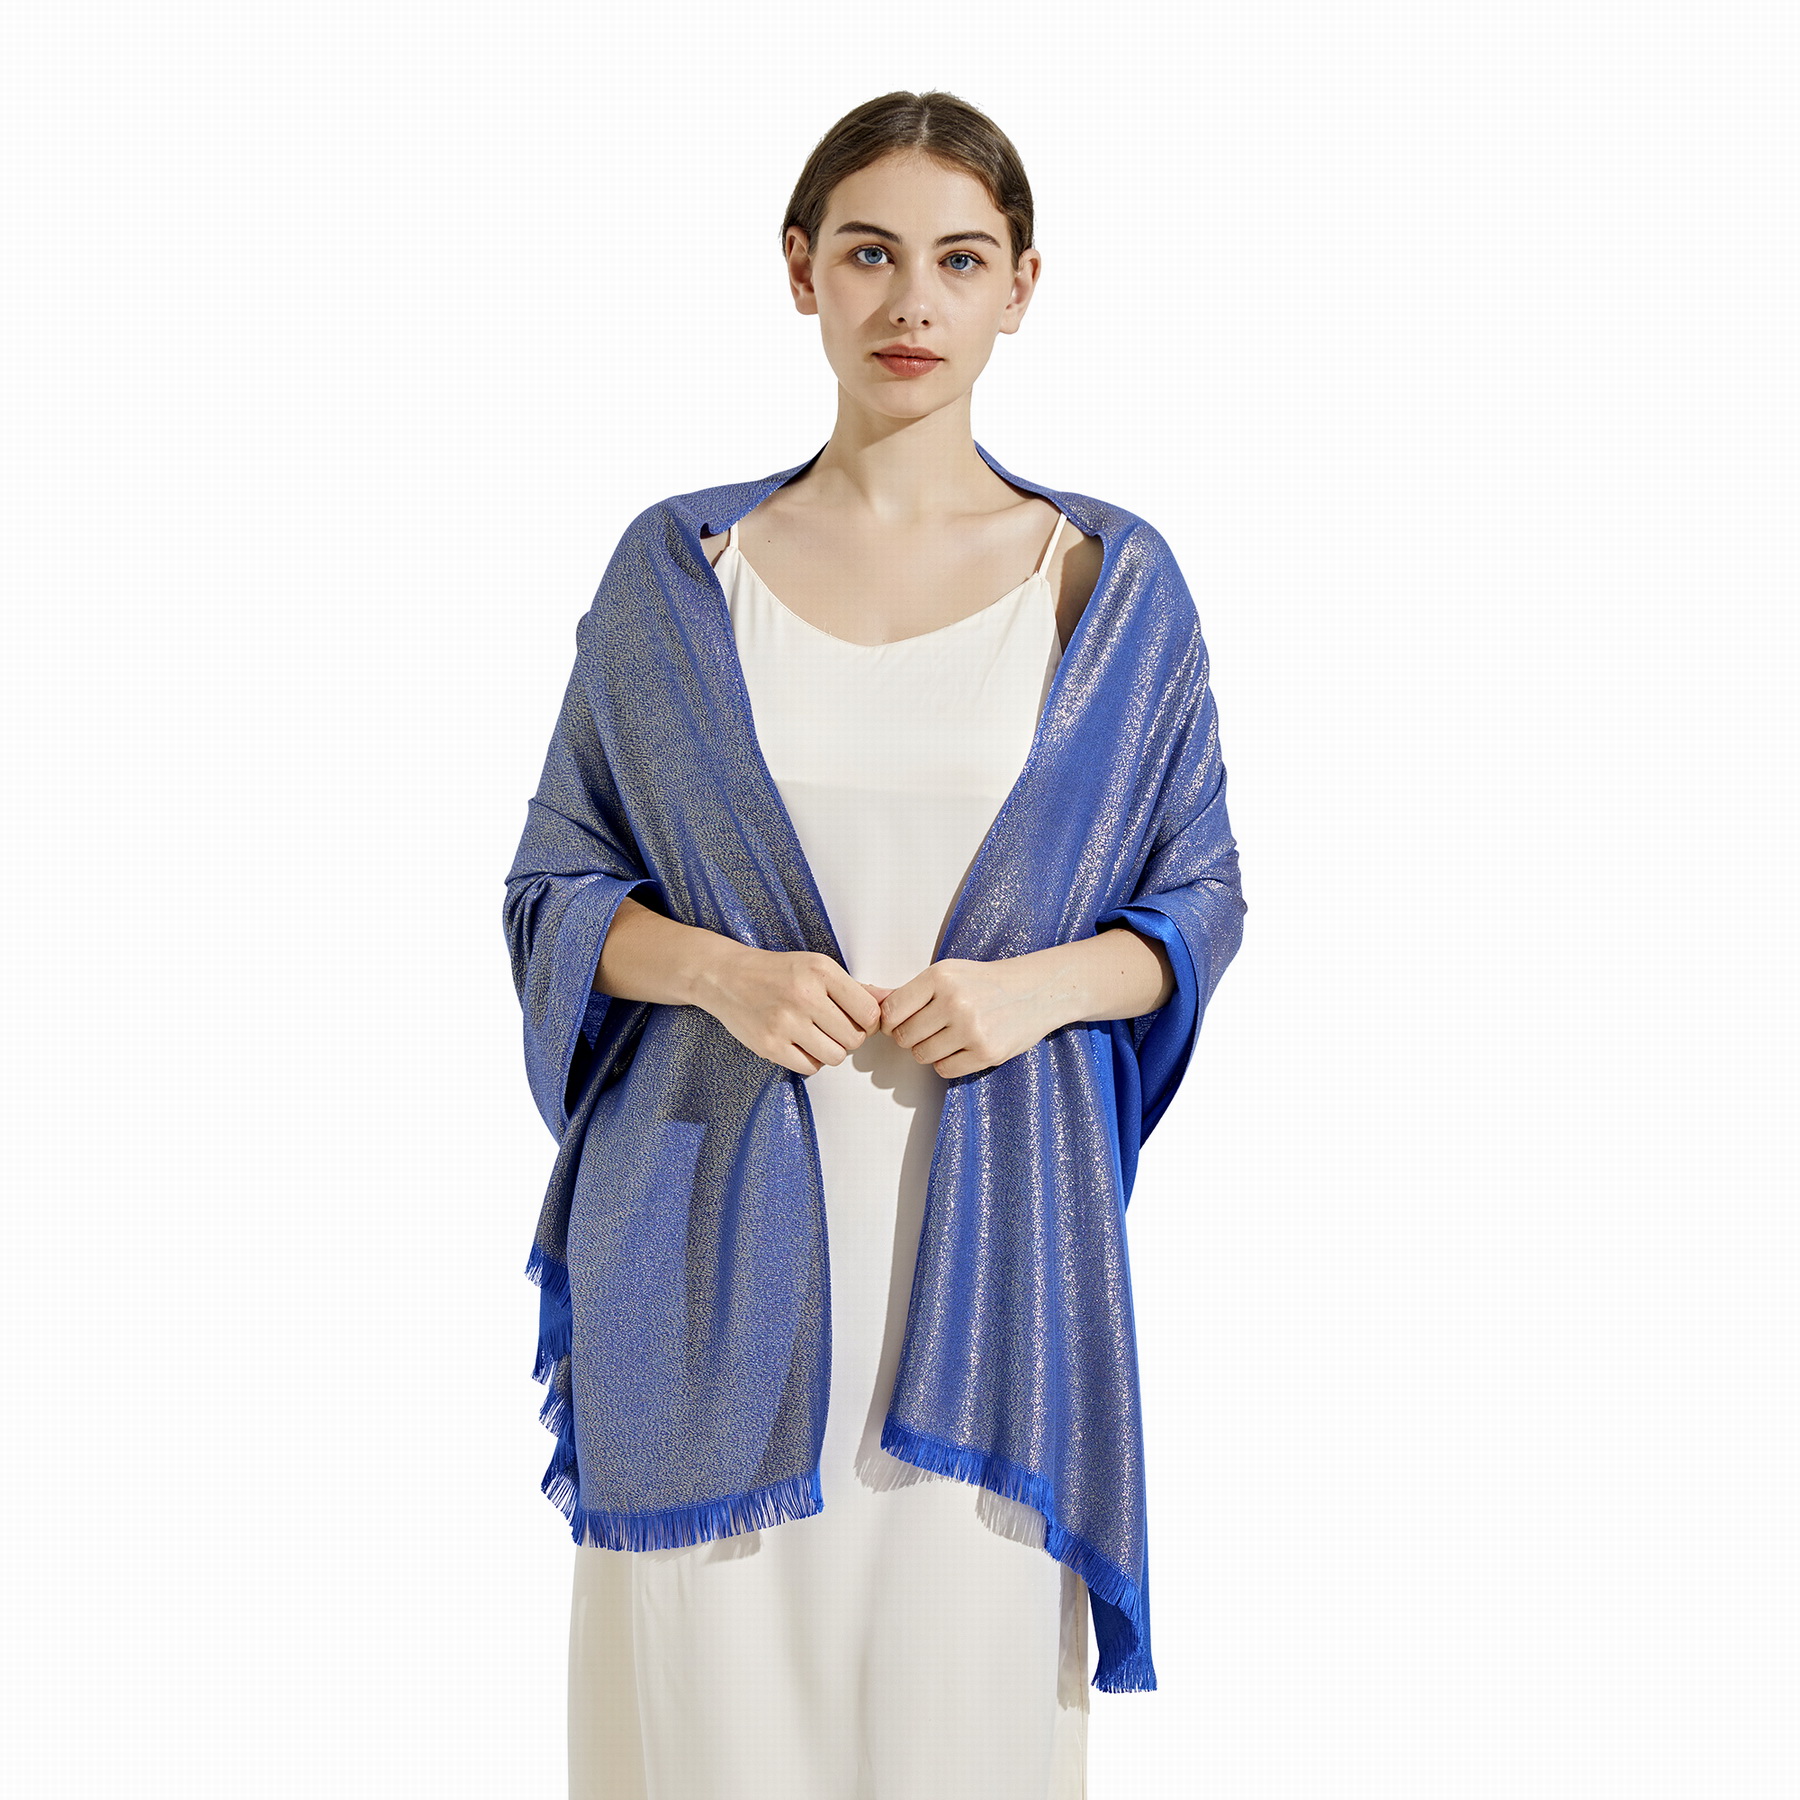 Elegant Sparkly Royal Blue Wedding Shawls and Scarf Wraps for Party Dresses